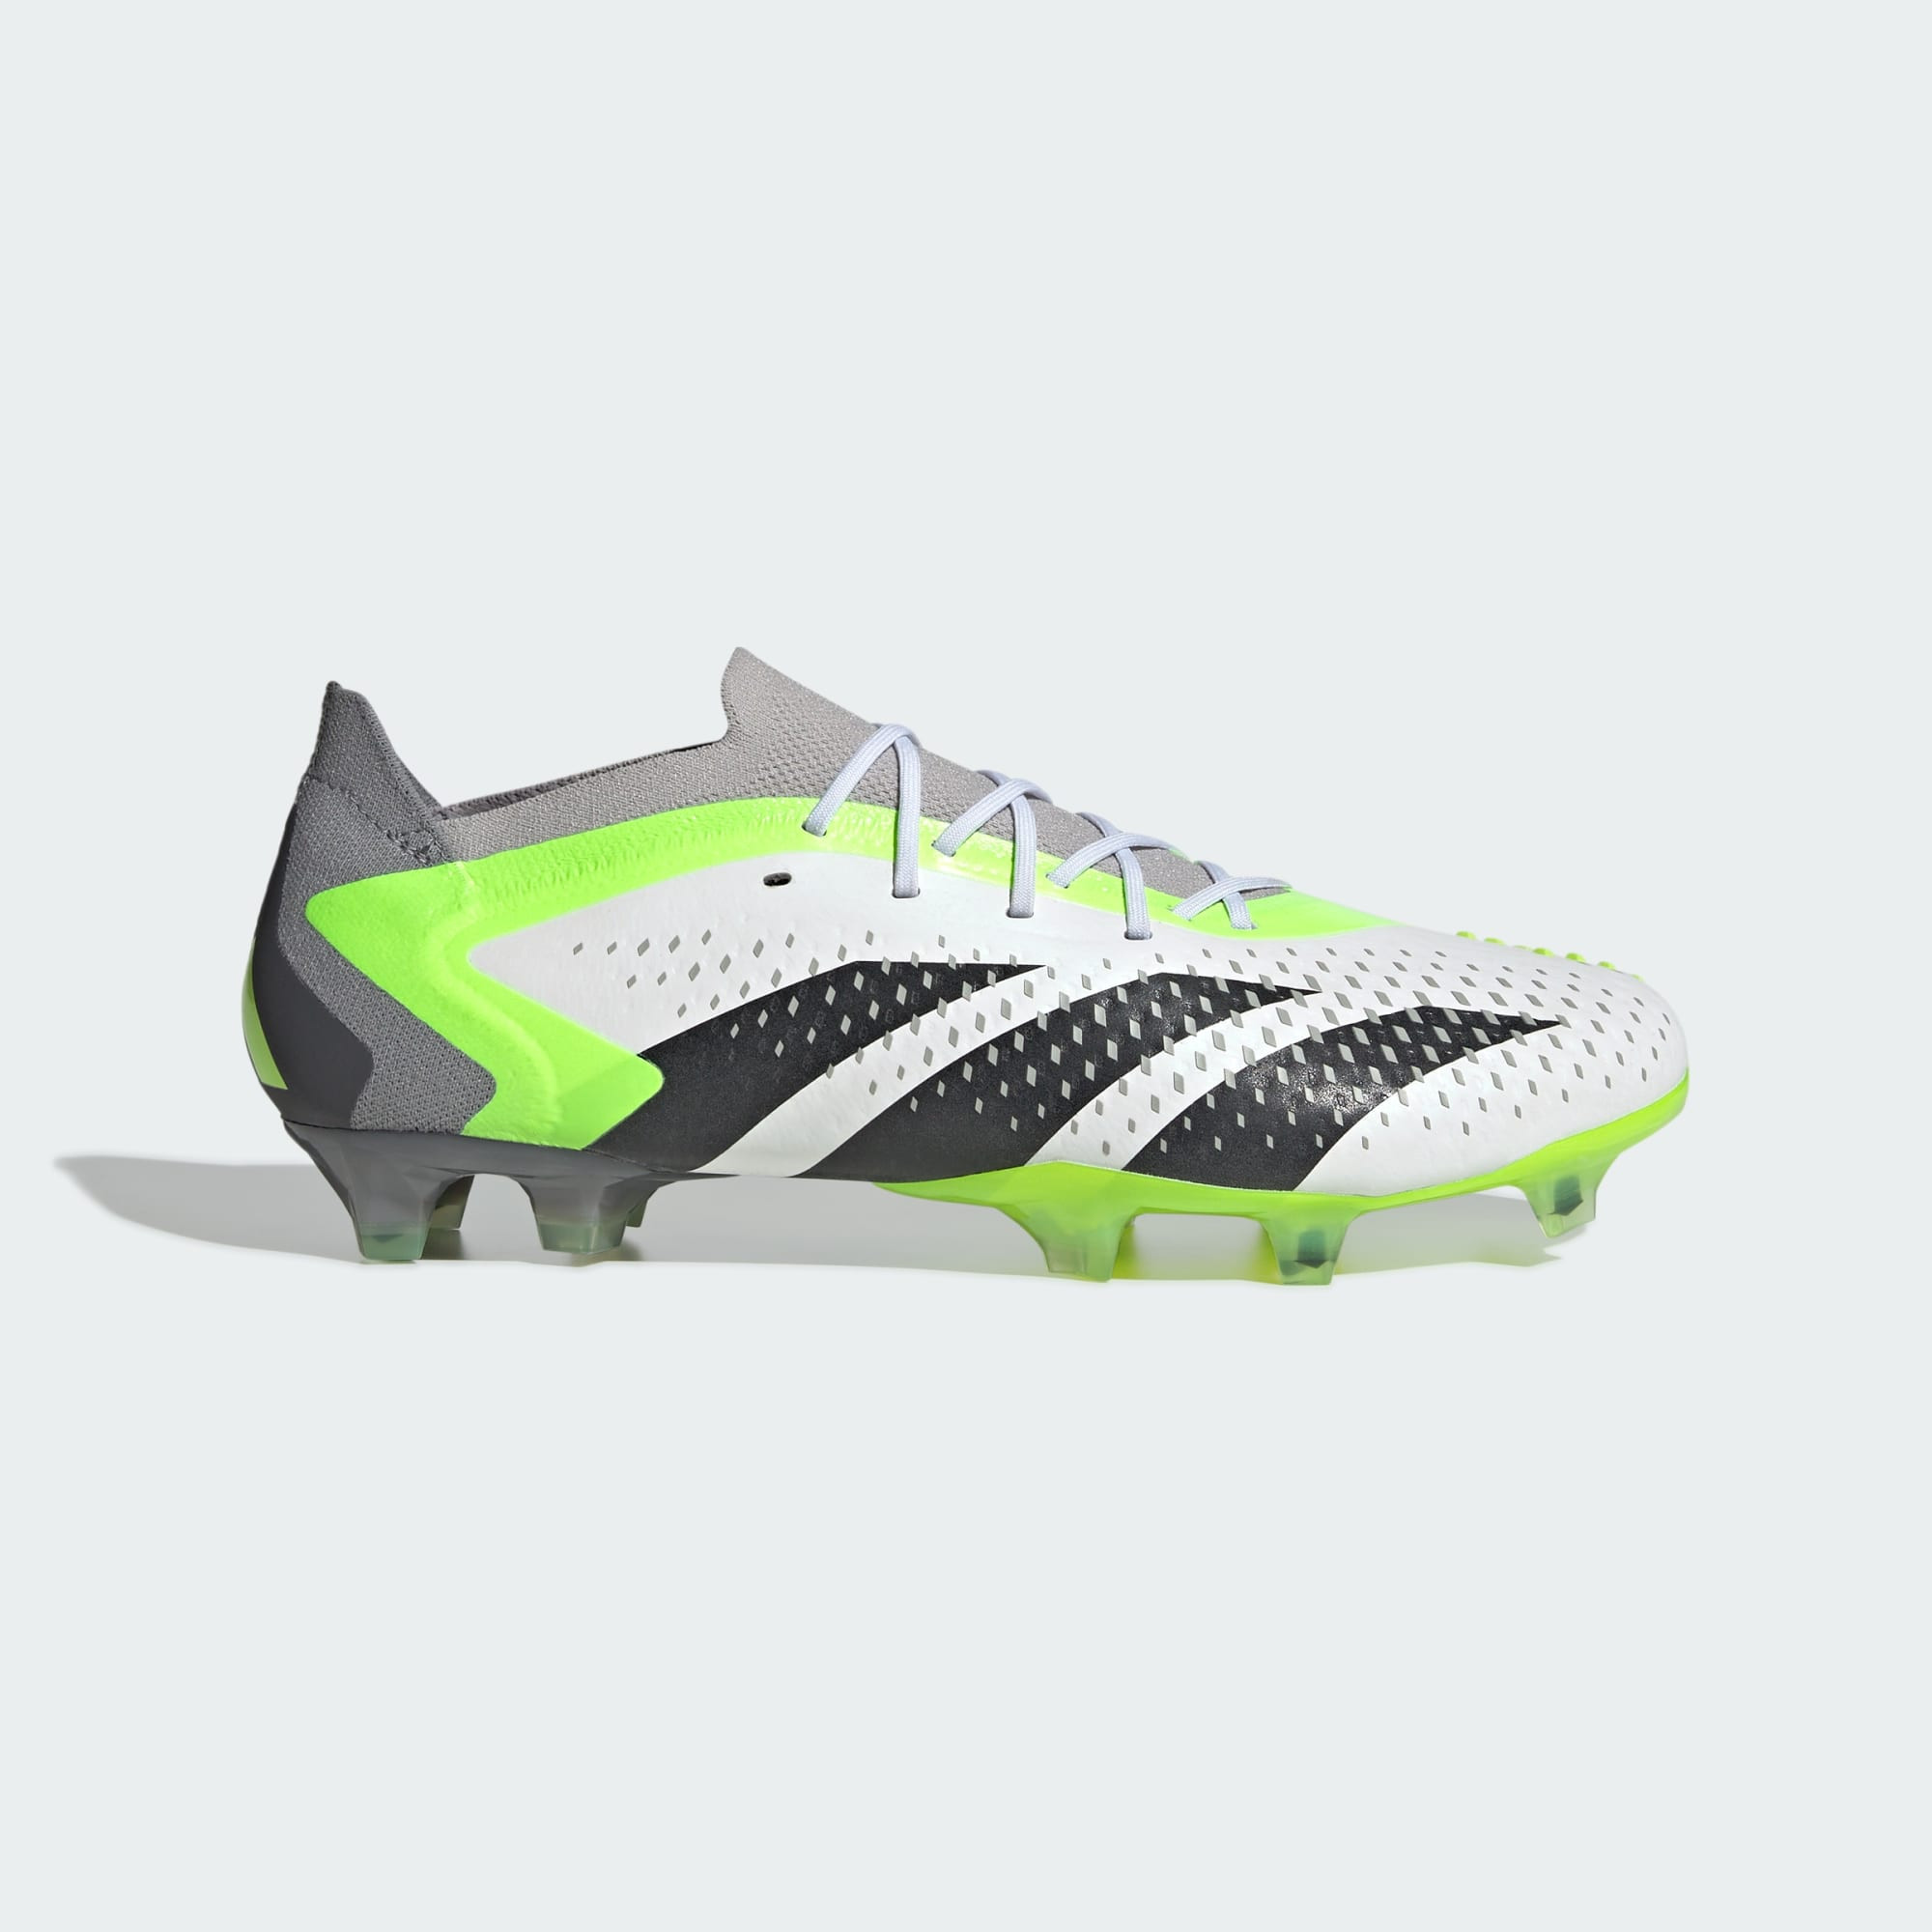 adidas Predator Accuracy.1 Low Firm Ground Boots (9000161654_69576)